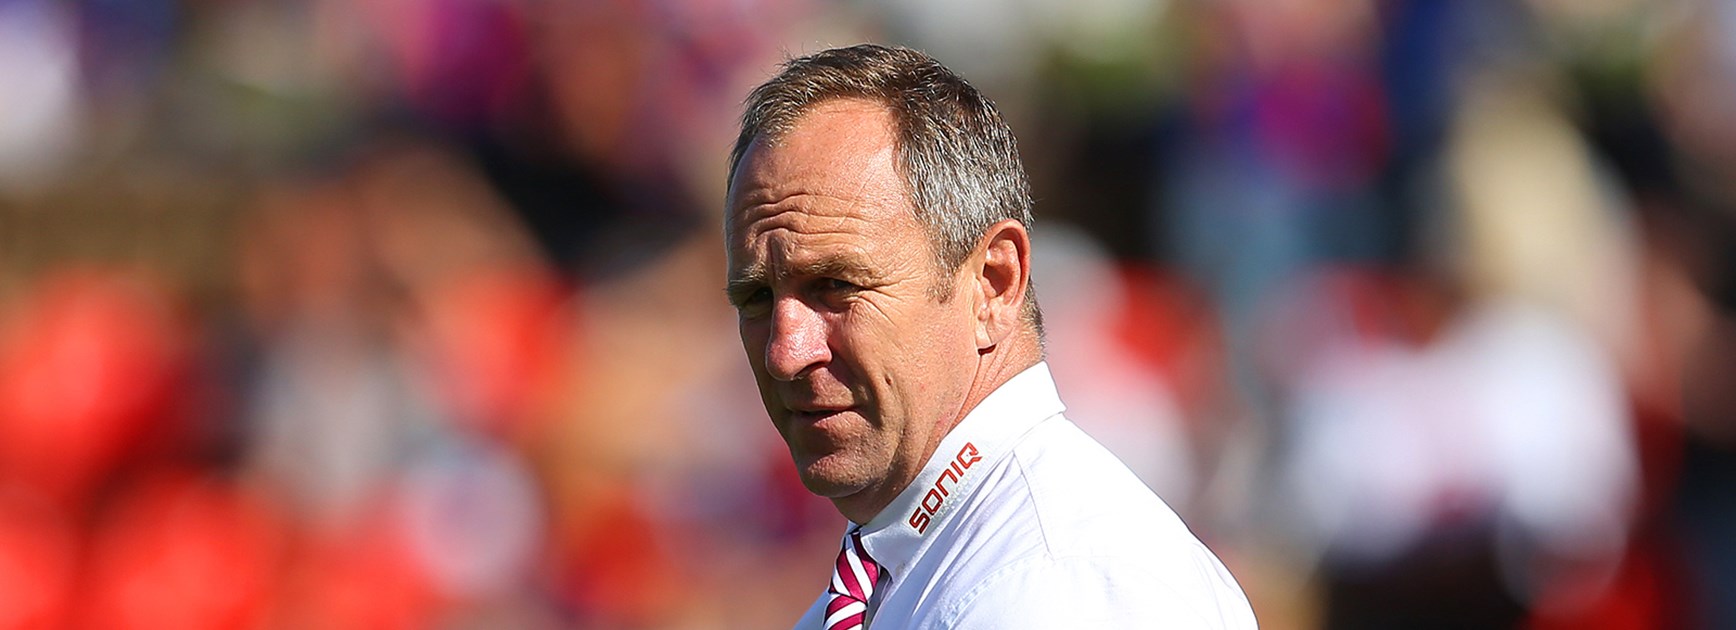 Manly assistant coach John Cartwright could coach the NSW Blues in 2018.